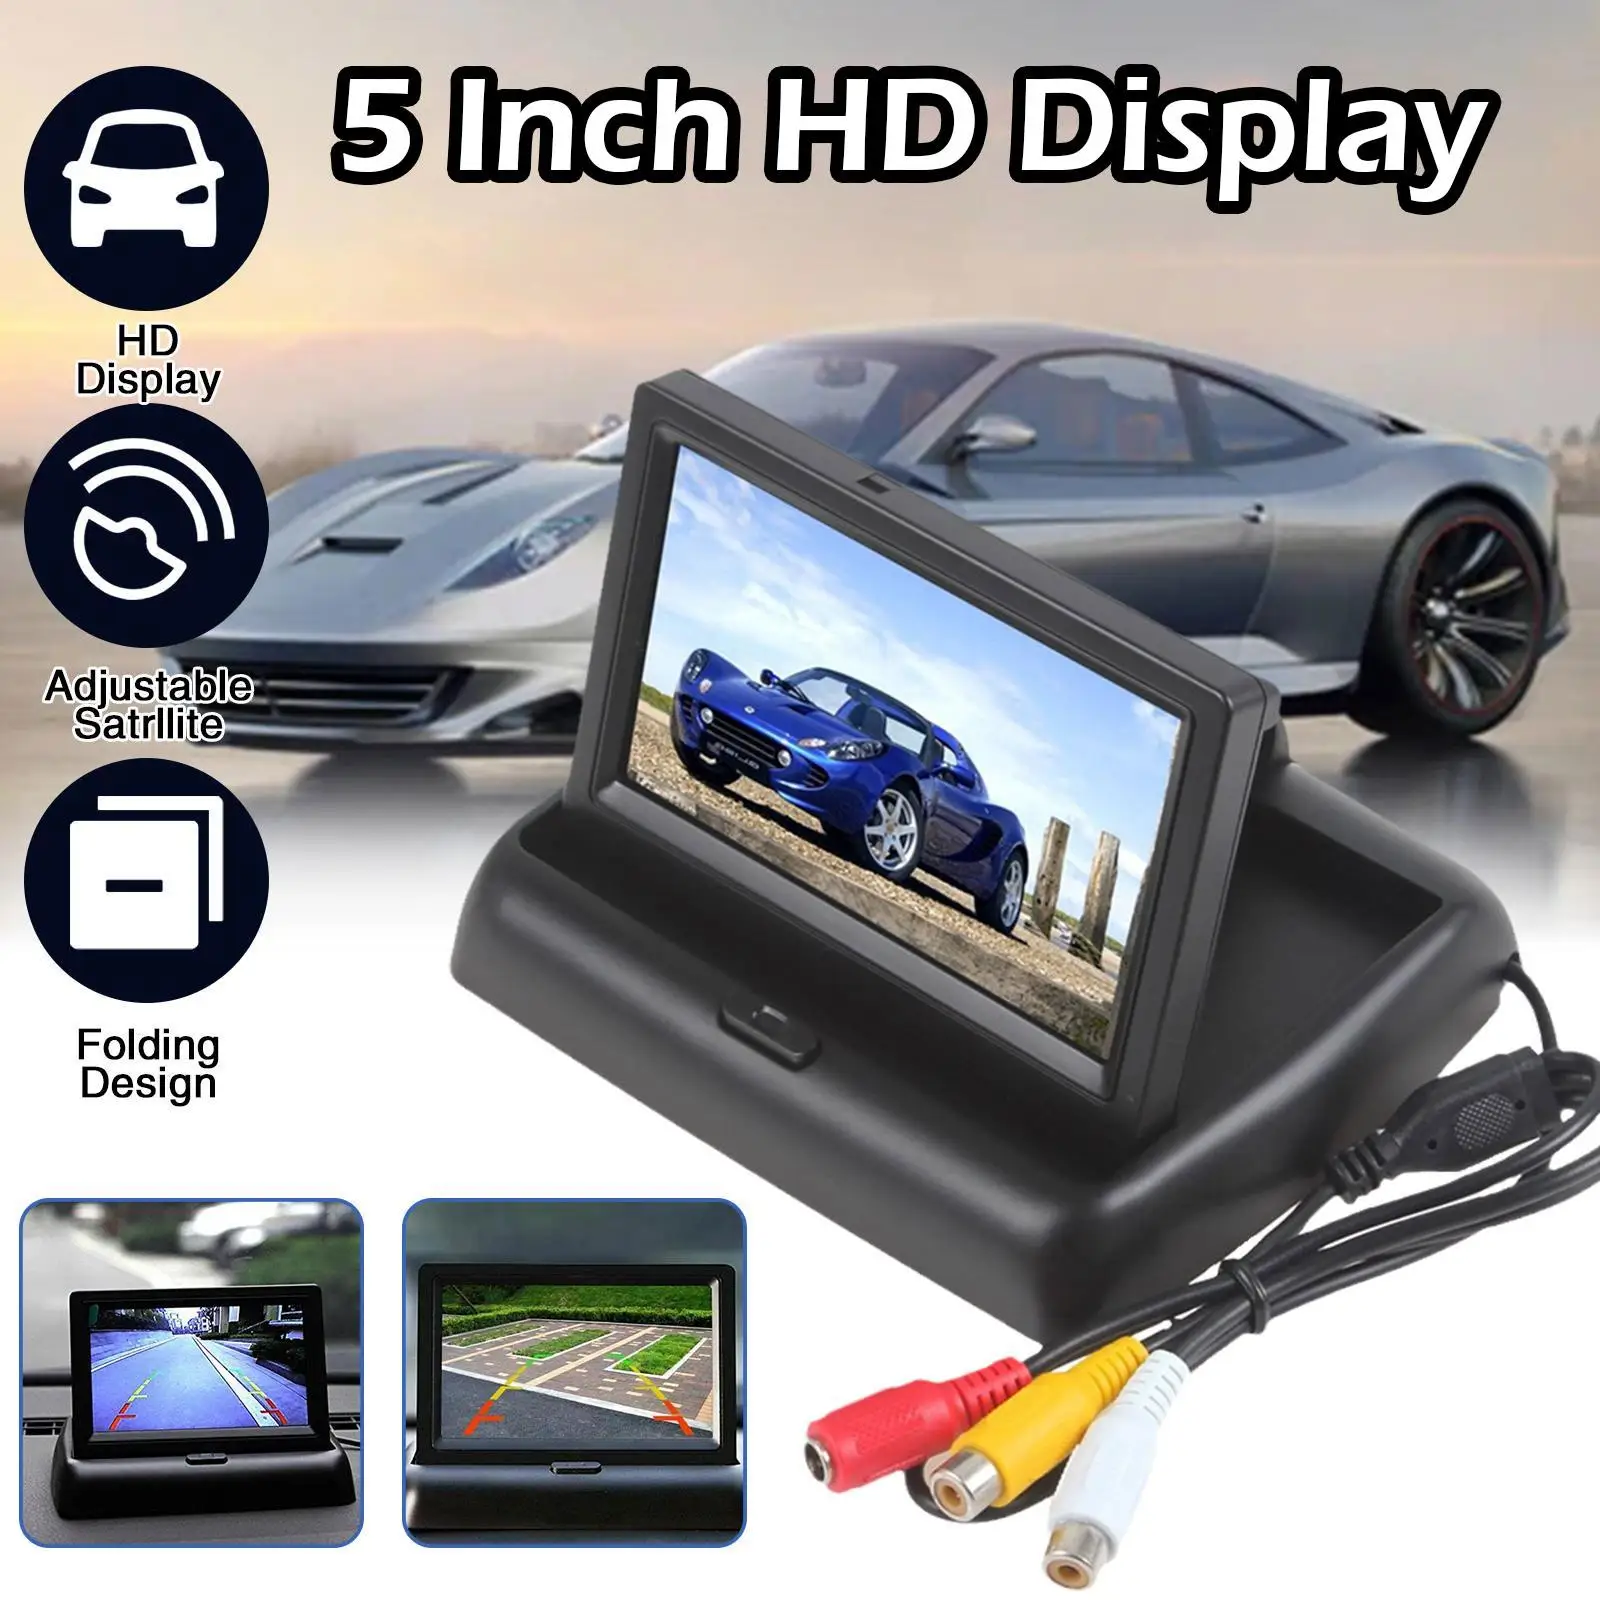 

5 Inch TFT LCD Car Monitor Car Rear View Monitor 2-channel Input Video Foldable Car Monitor S3W6